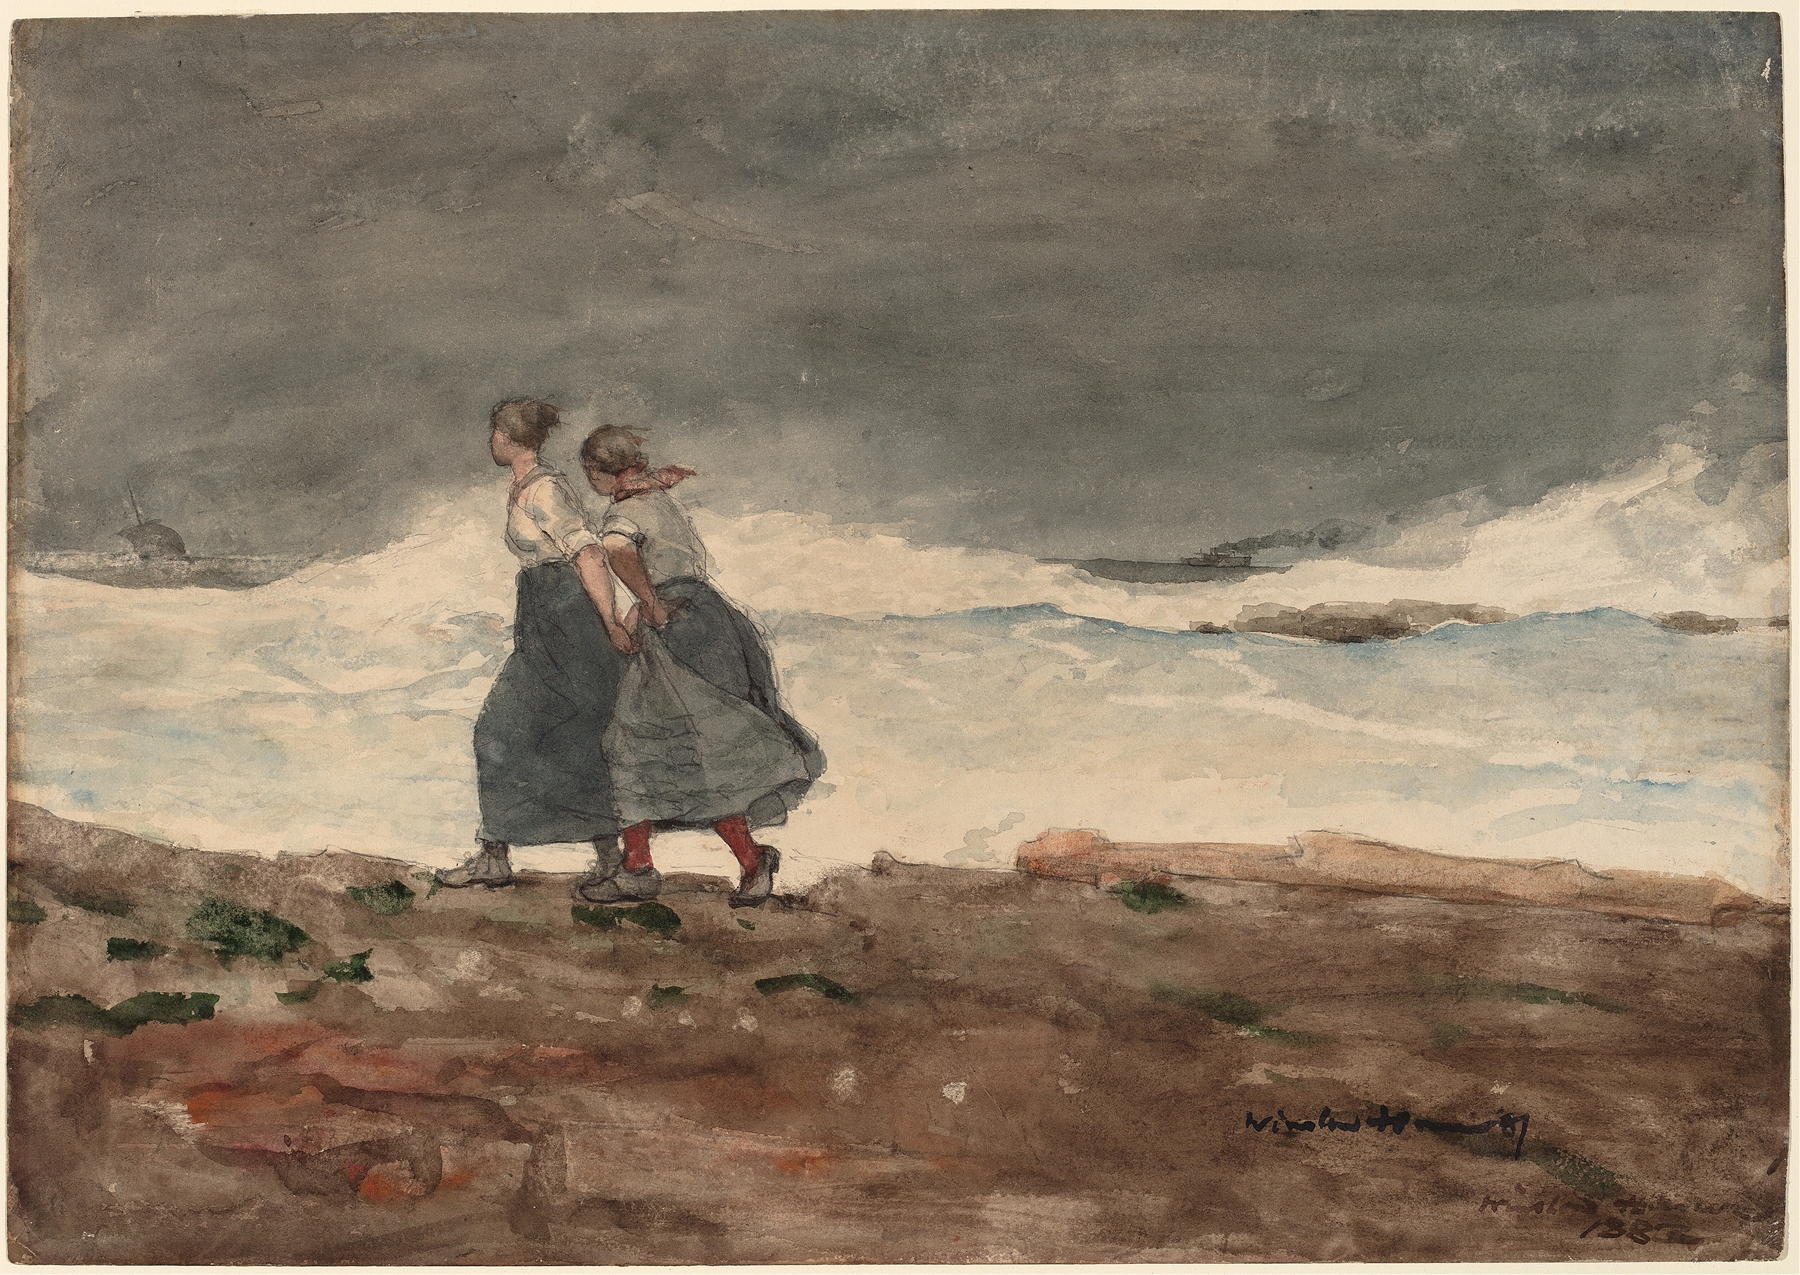 Painting Danger by Winslow Homer